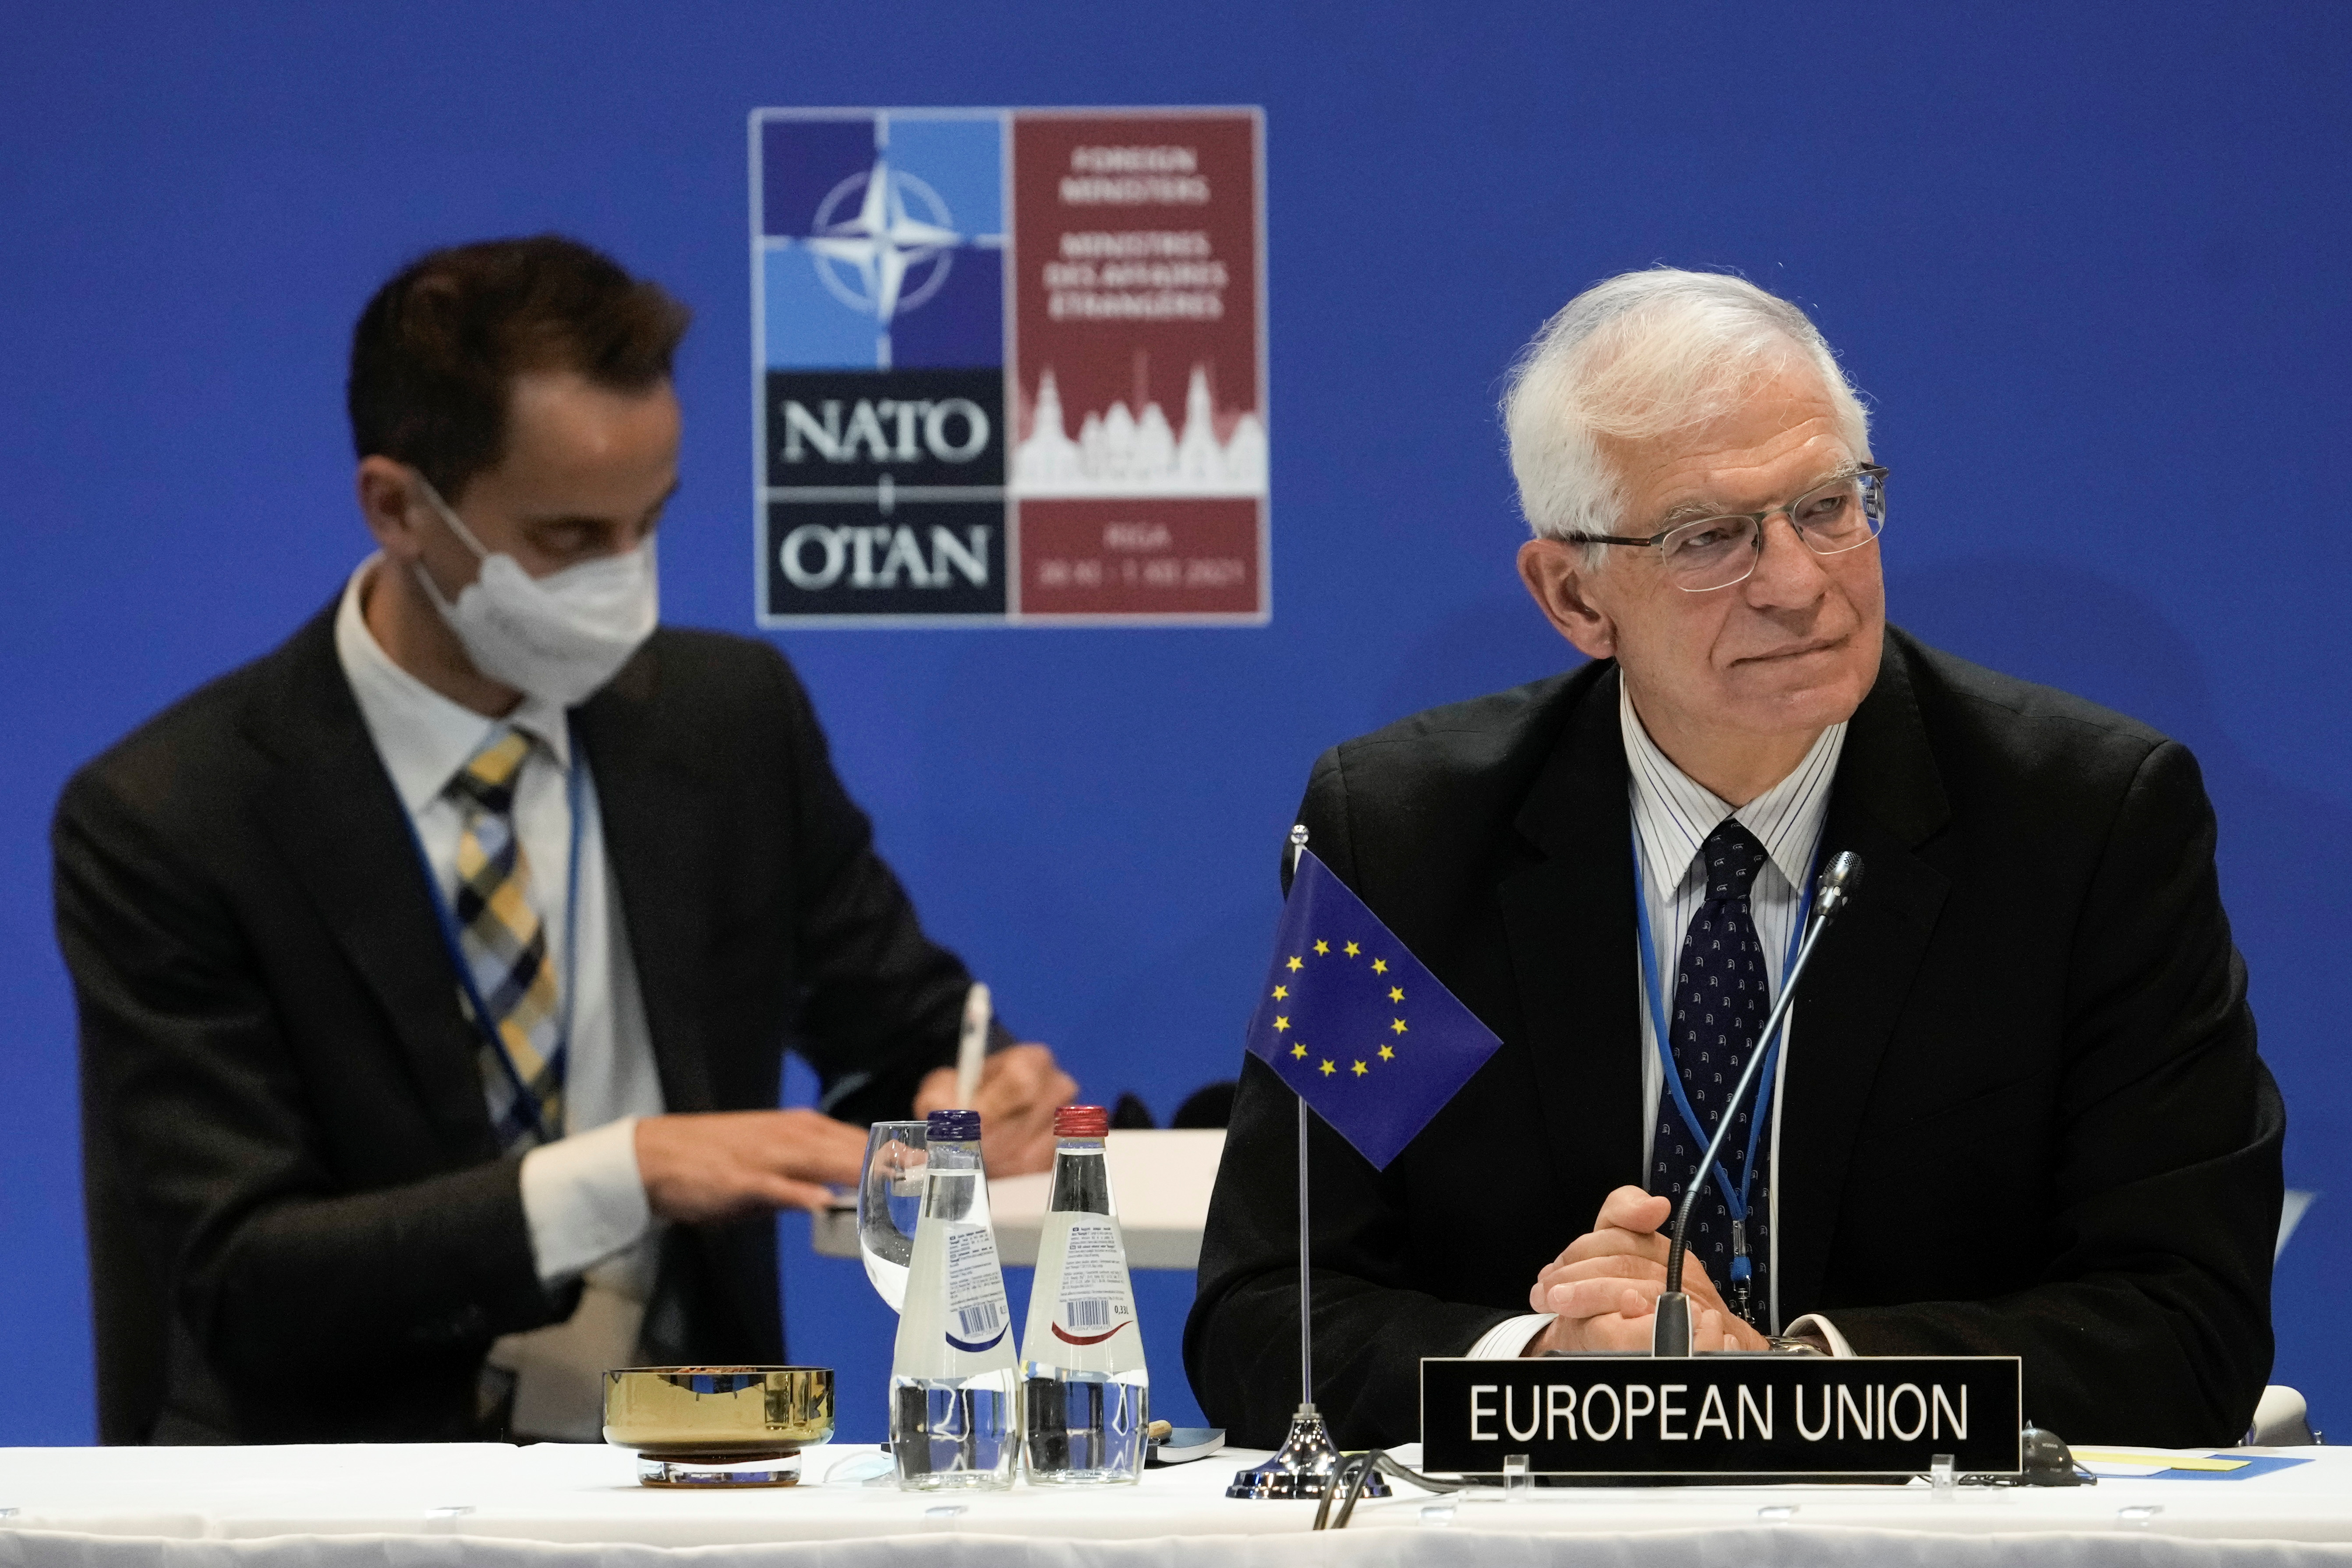 EU's foreign policy chief and European Commission Vice-President Josep Borrell attends the NATO Foreign Ministers summit in Riga, Latvia December 1, 2021. REUTERS/Ints Kalnins